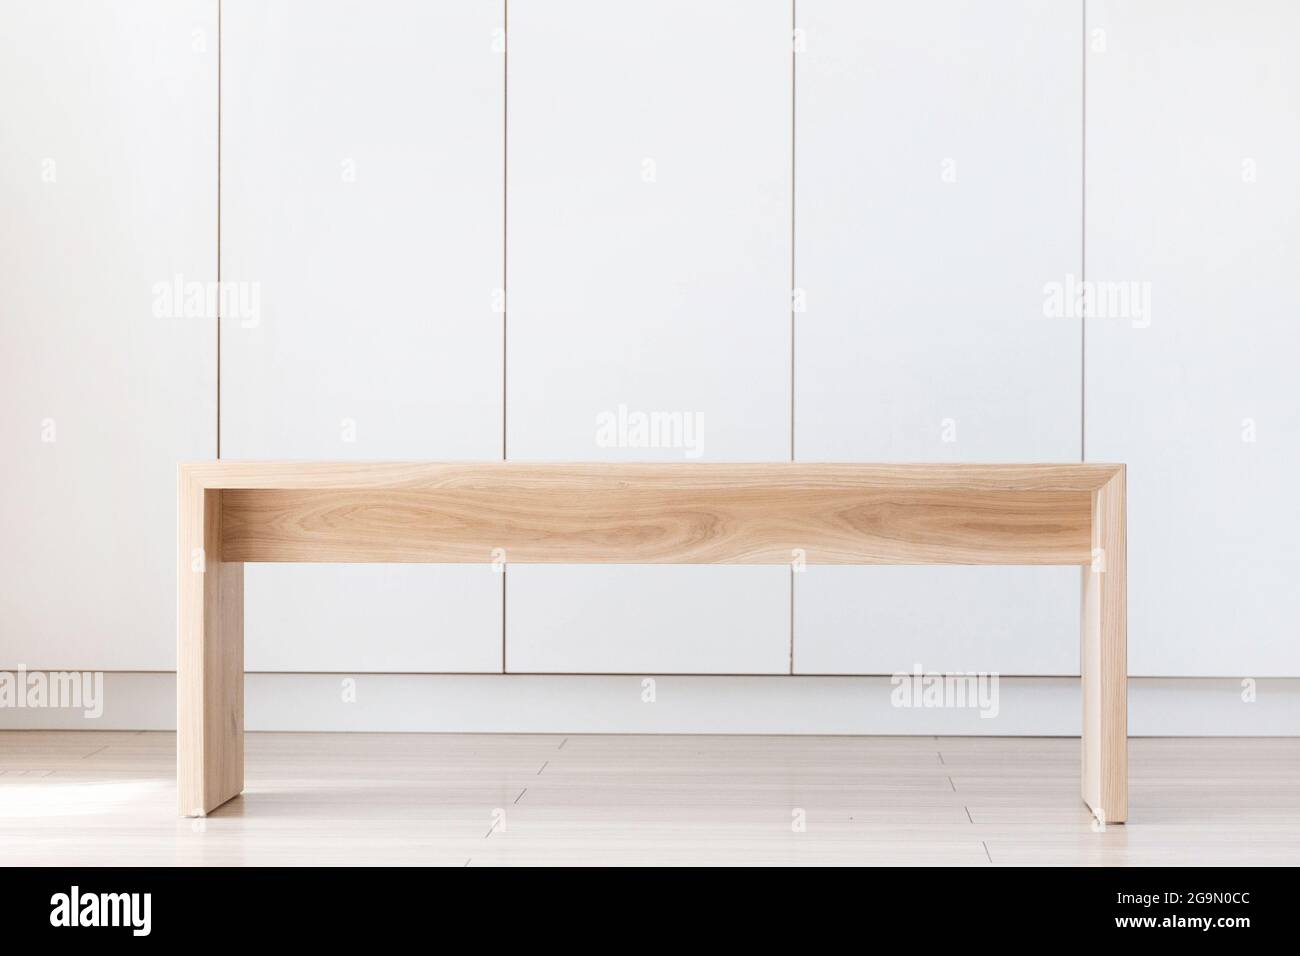 Minimal wooden bench, simple furniture Stock Photo